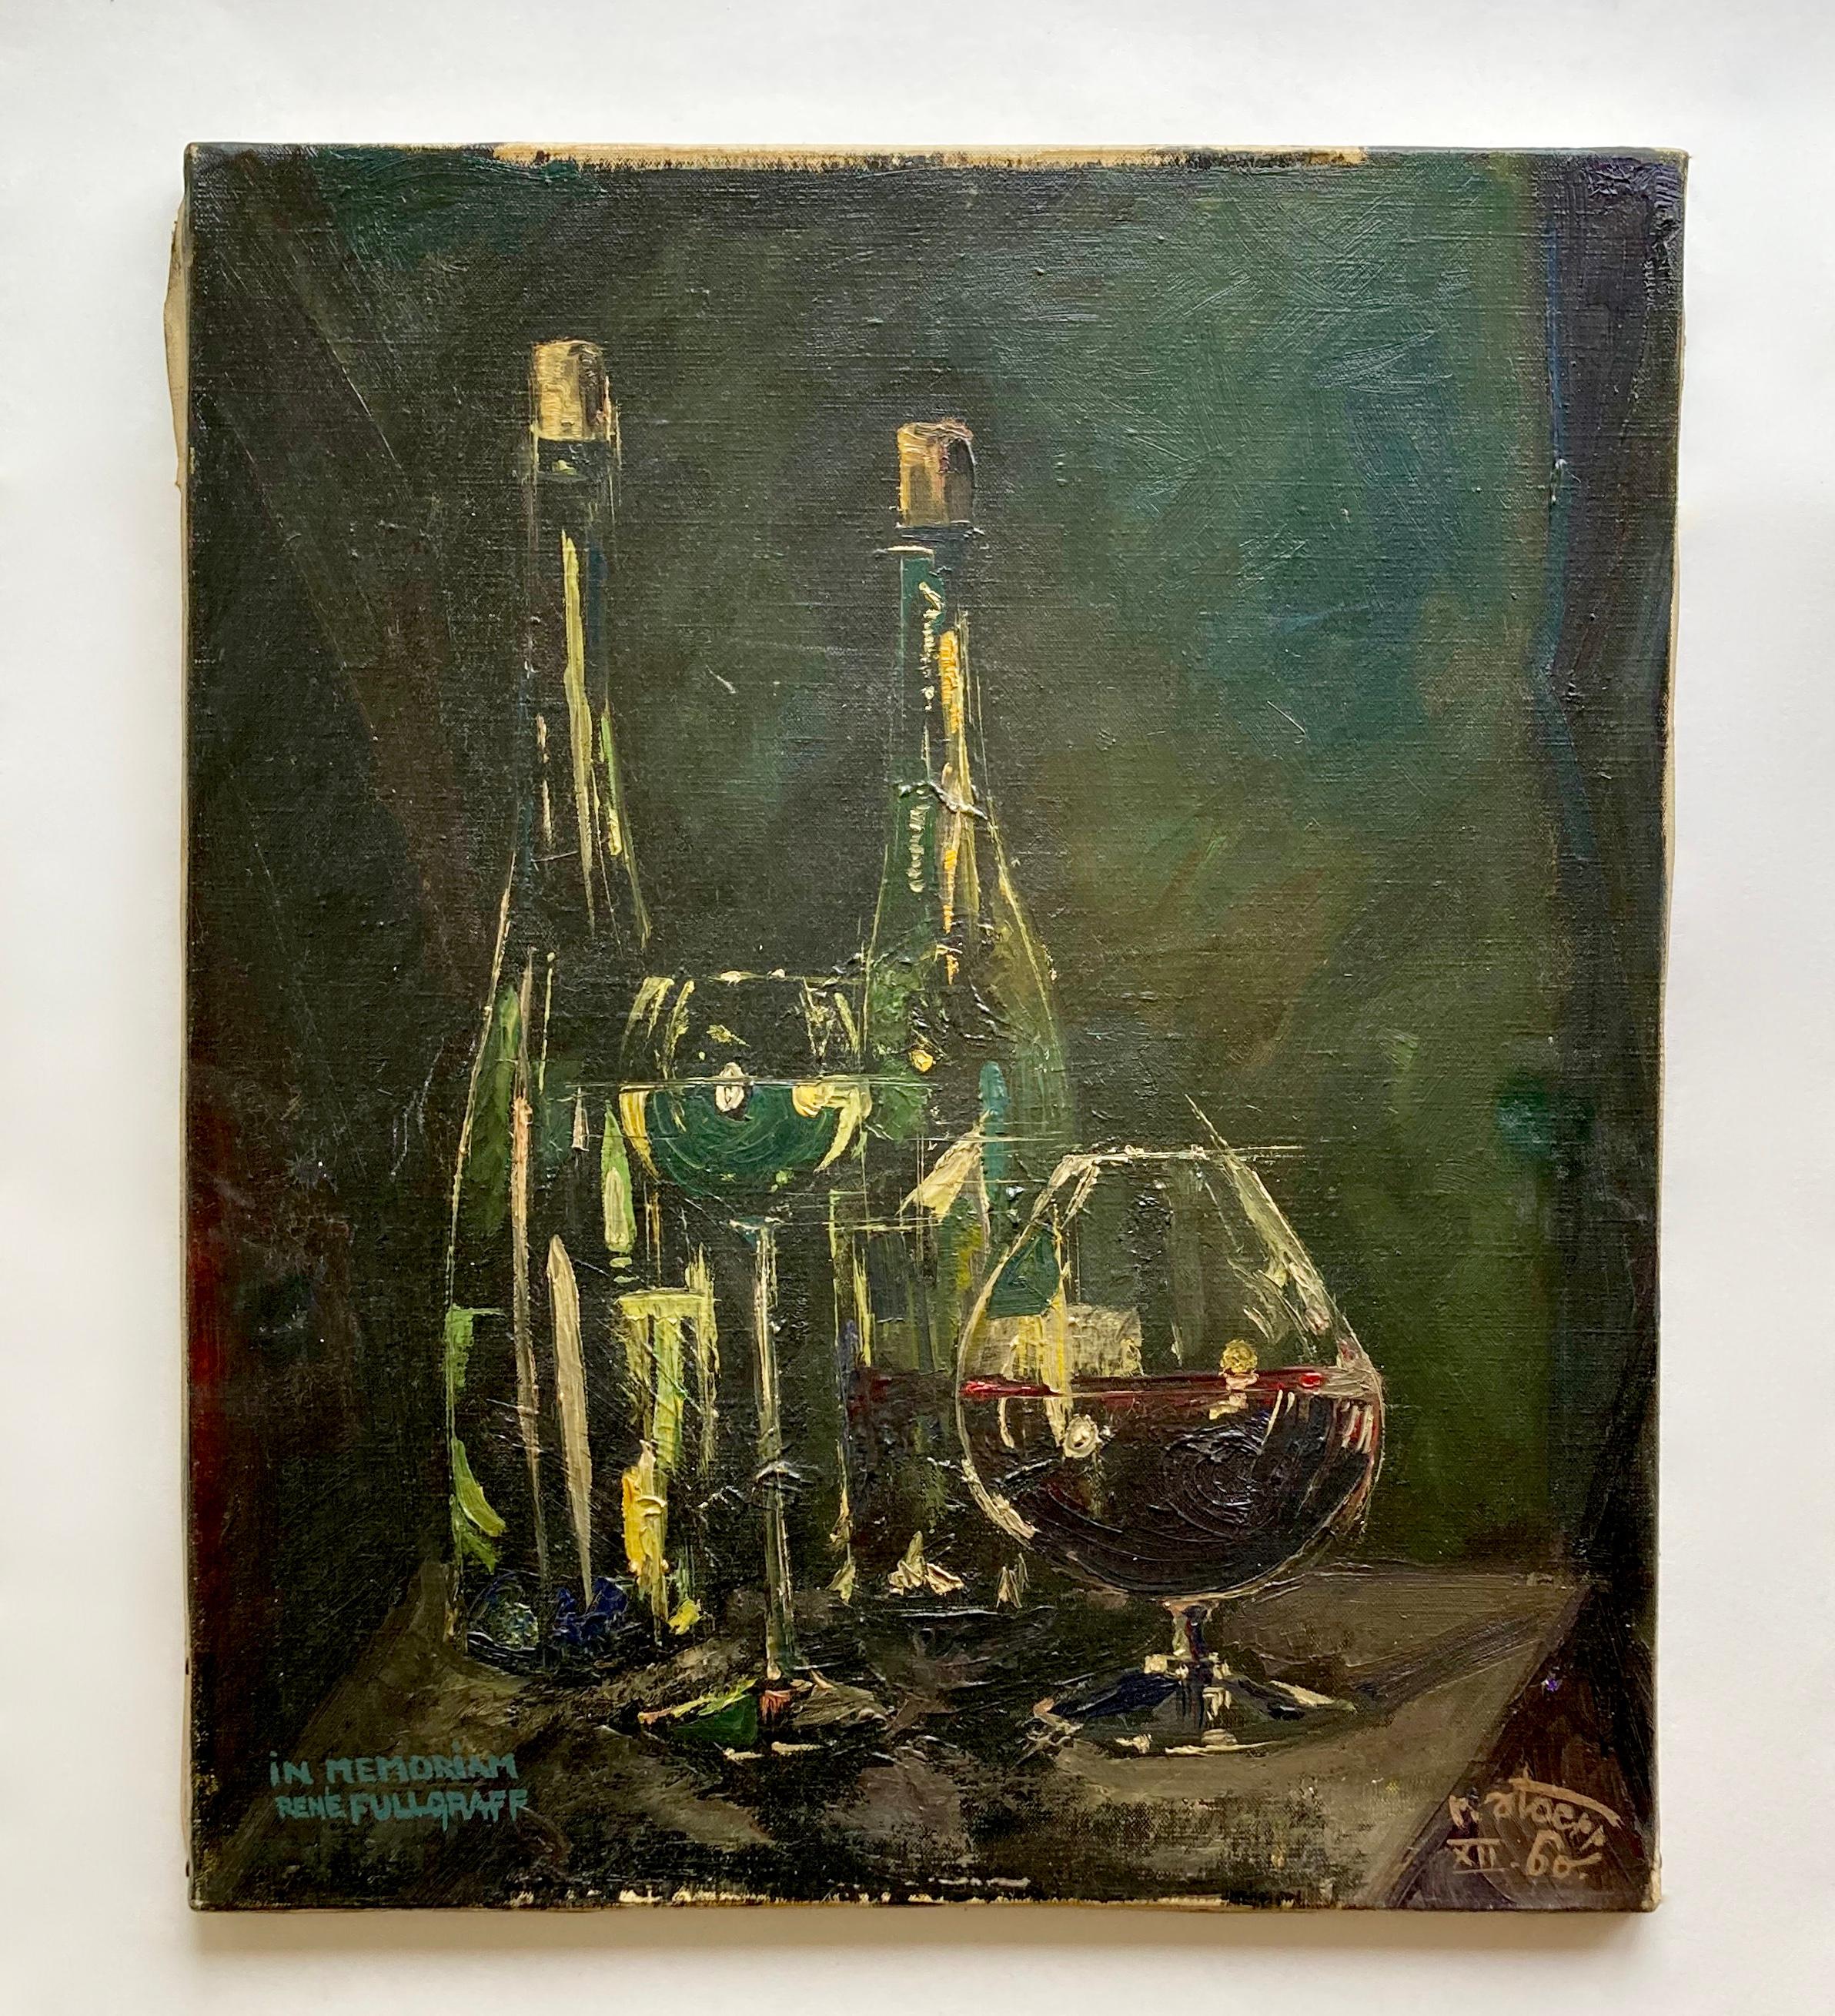 A moody still-life very much in a mid-century spirit. This vintage oil painting on stretched canvas has been sourced in the wine region of Alsace, France. It is very likely that it has been painted in this region as well since the wine bottles and